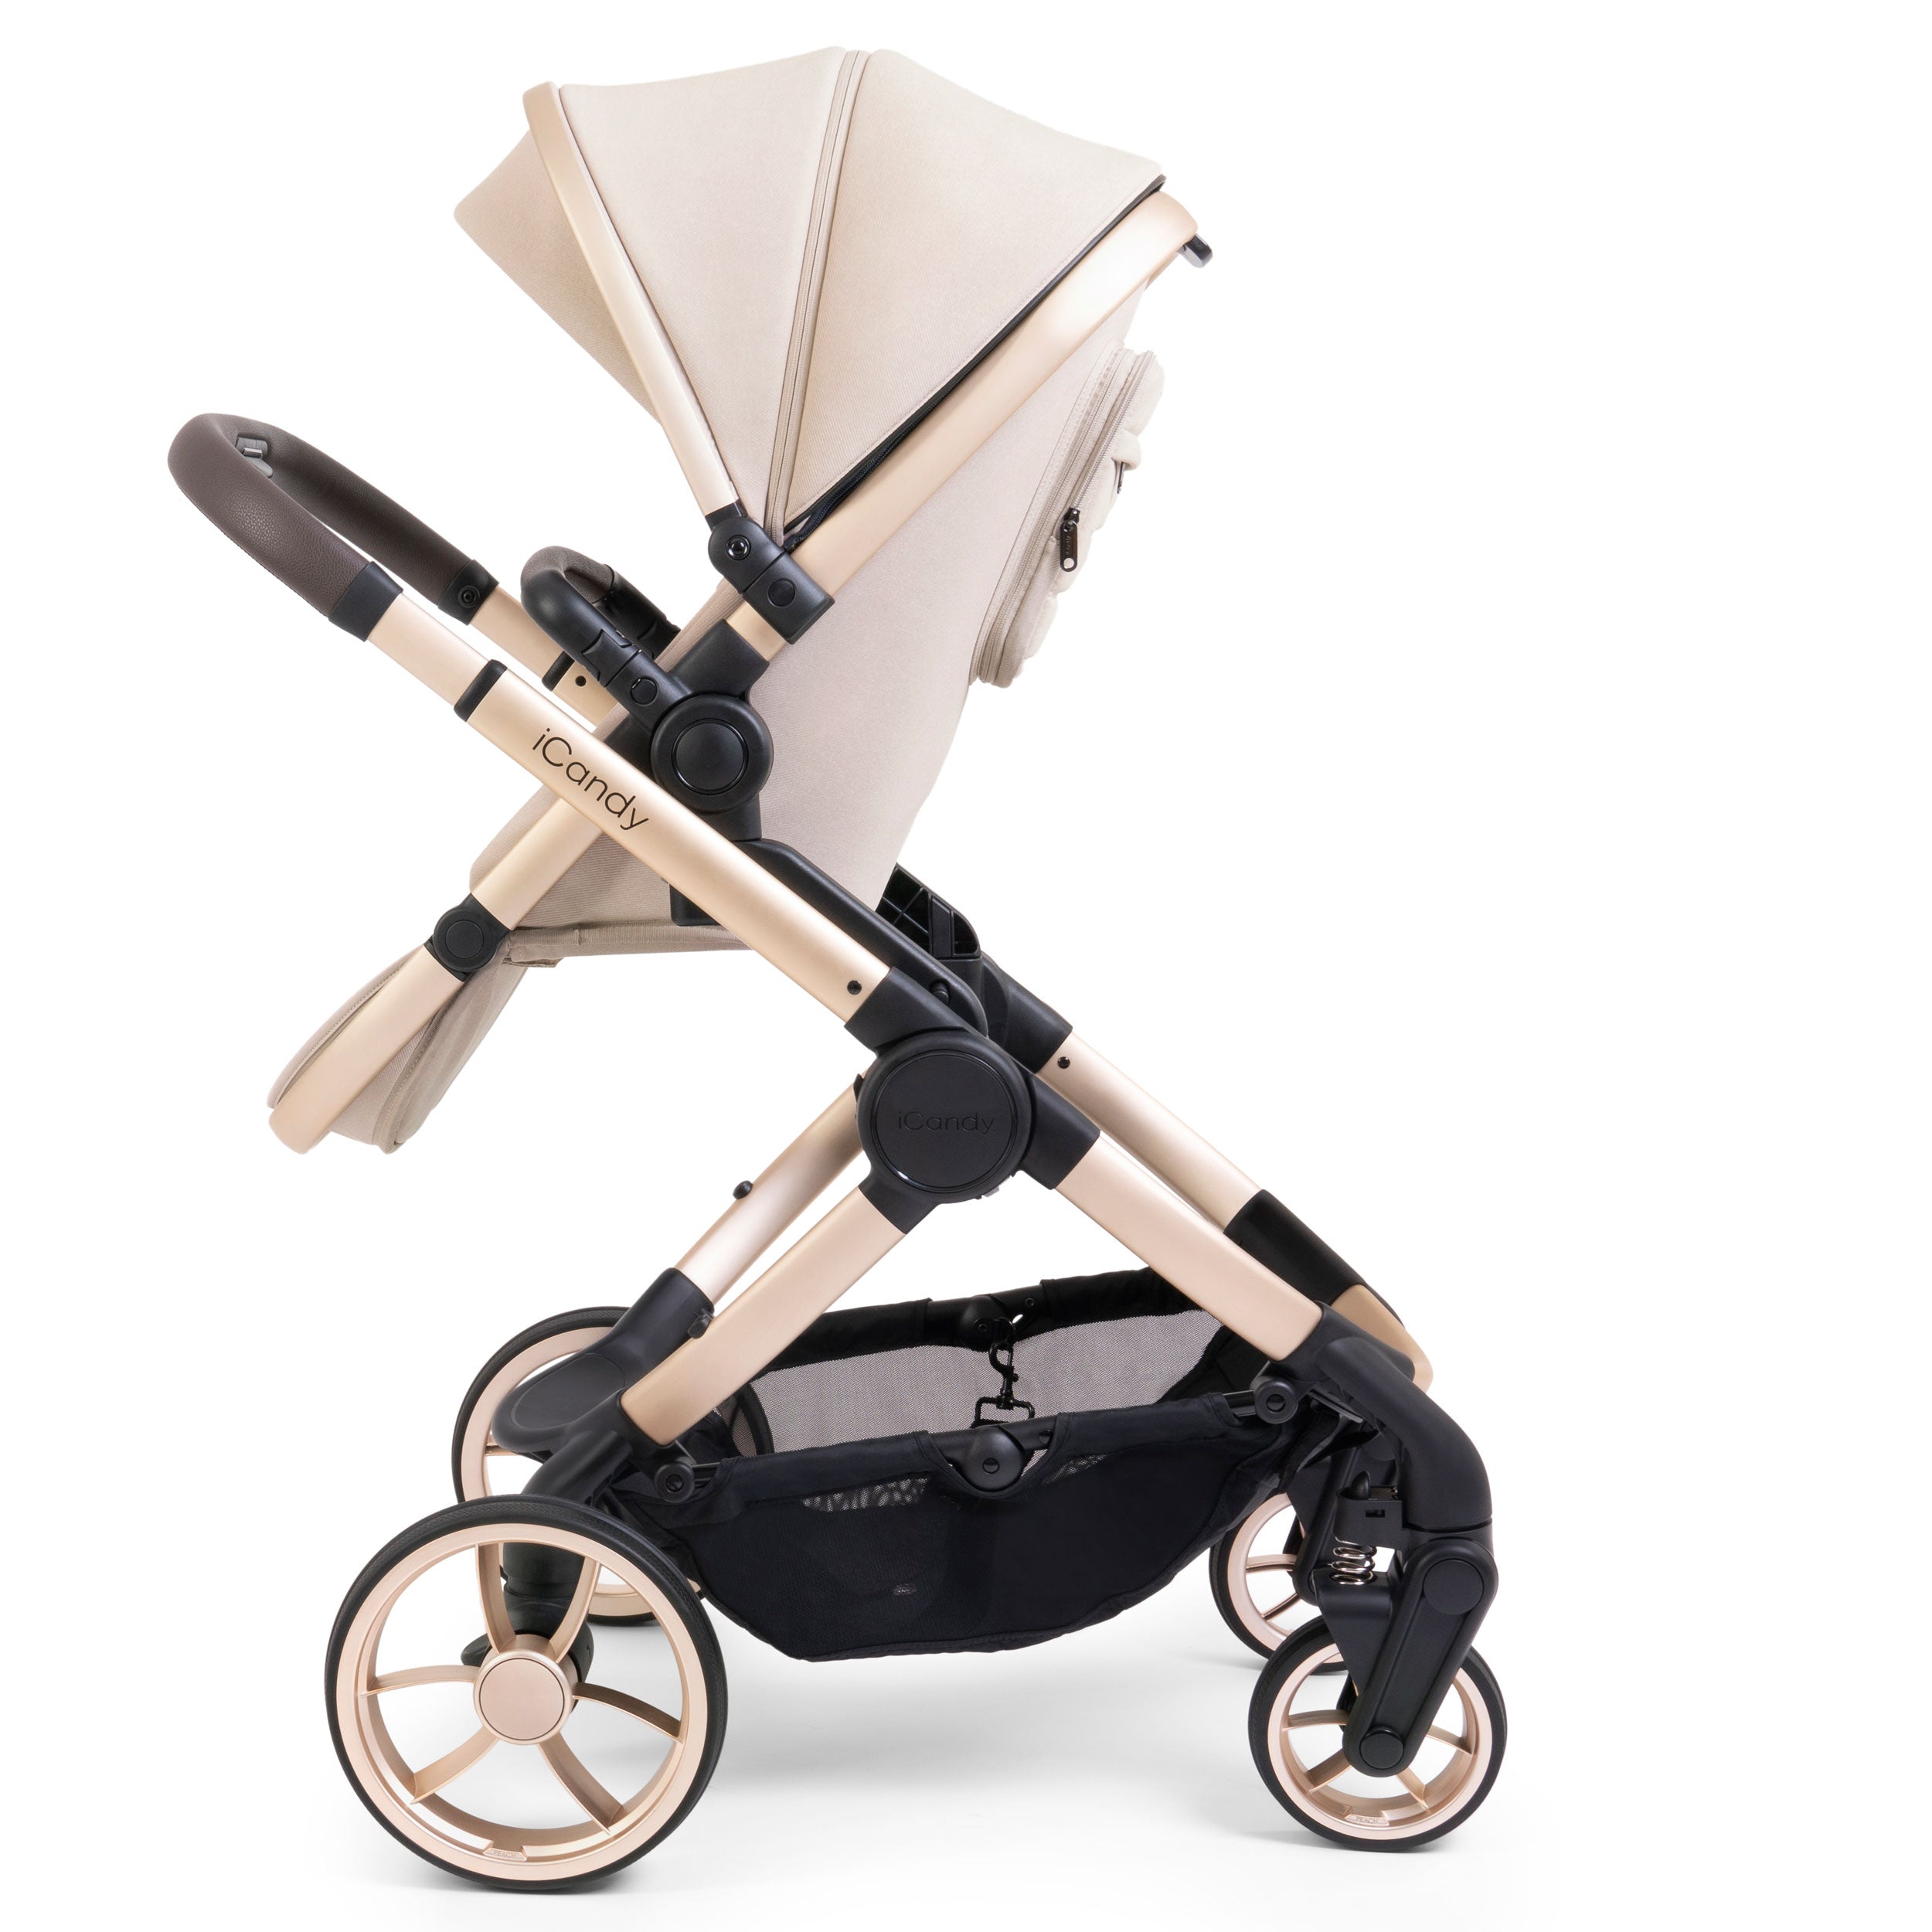 iCandy Peach 7 Cybex Combo Set in Biscotti